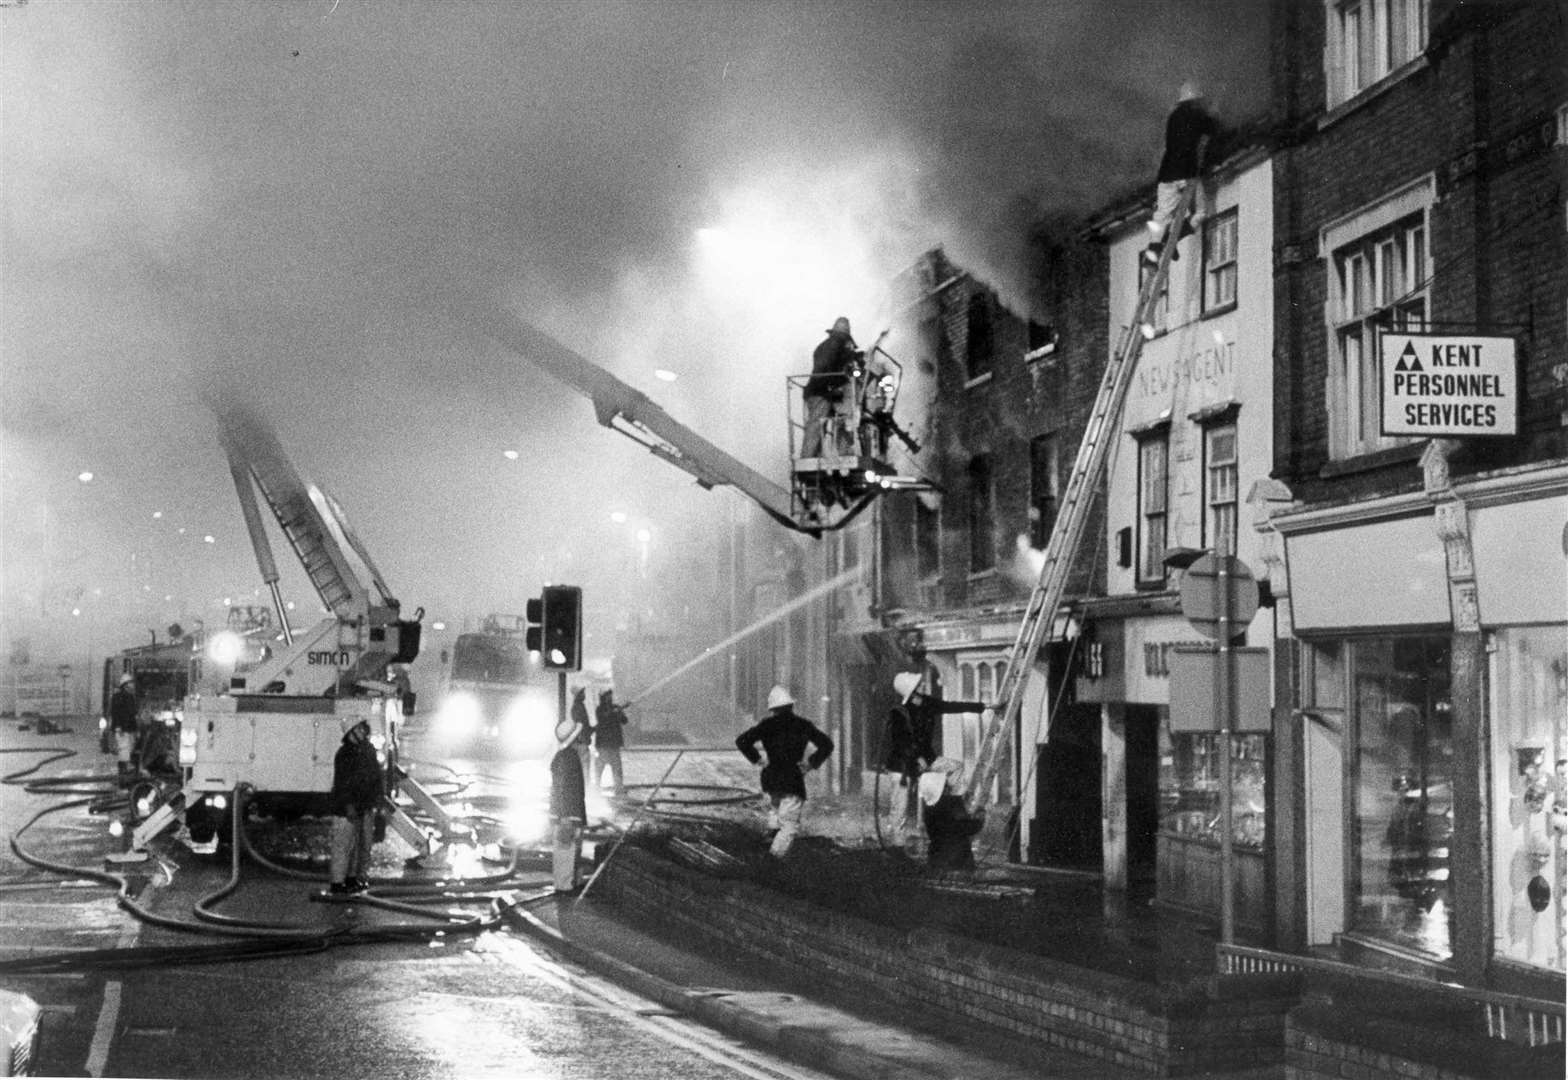 The flames tore through Maidstone Motor Spares shop in High Street, Maidstone, in March 1984, with exploding paint cans creating a serious hazard for firemen. Part of the 17th century listed building collapsed and there was also damage to neighbouring properties